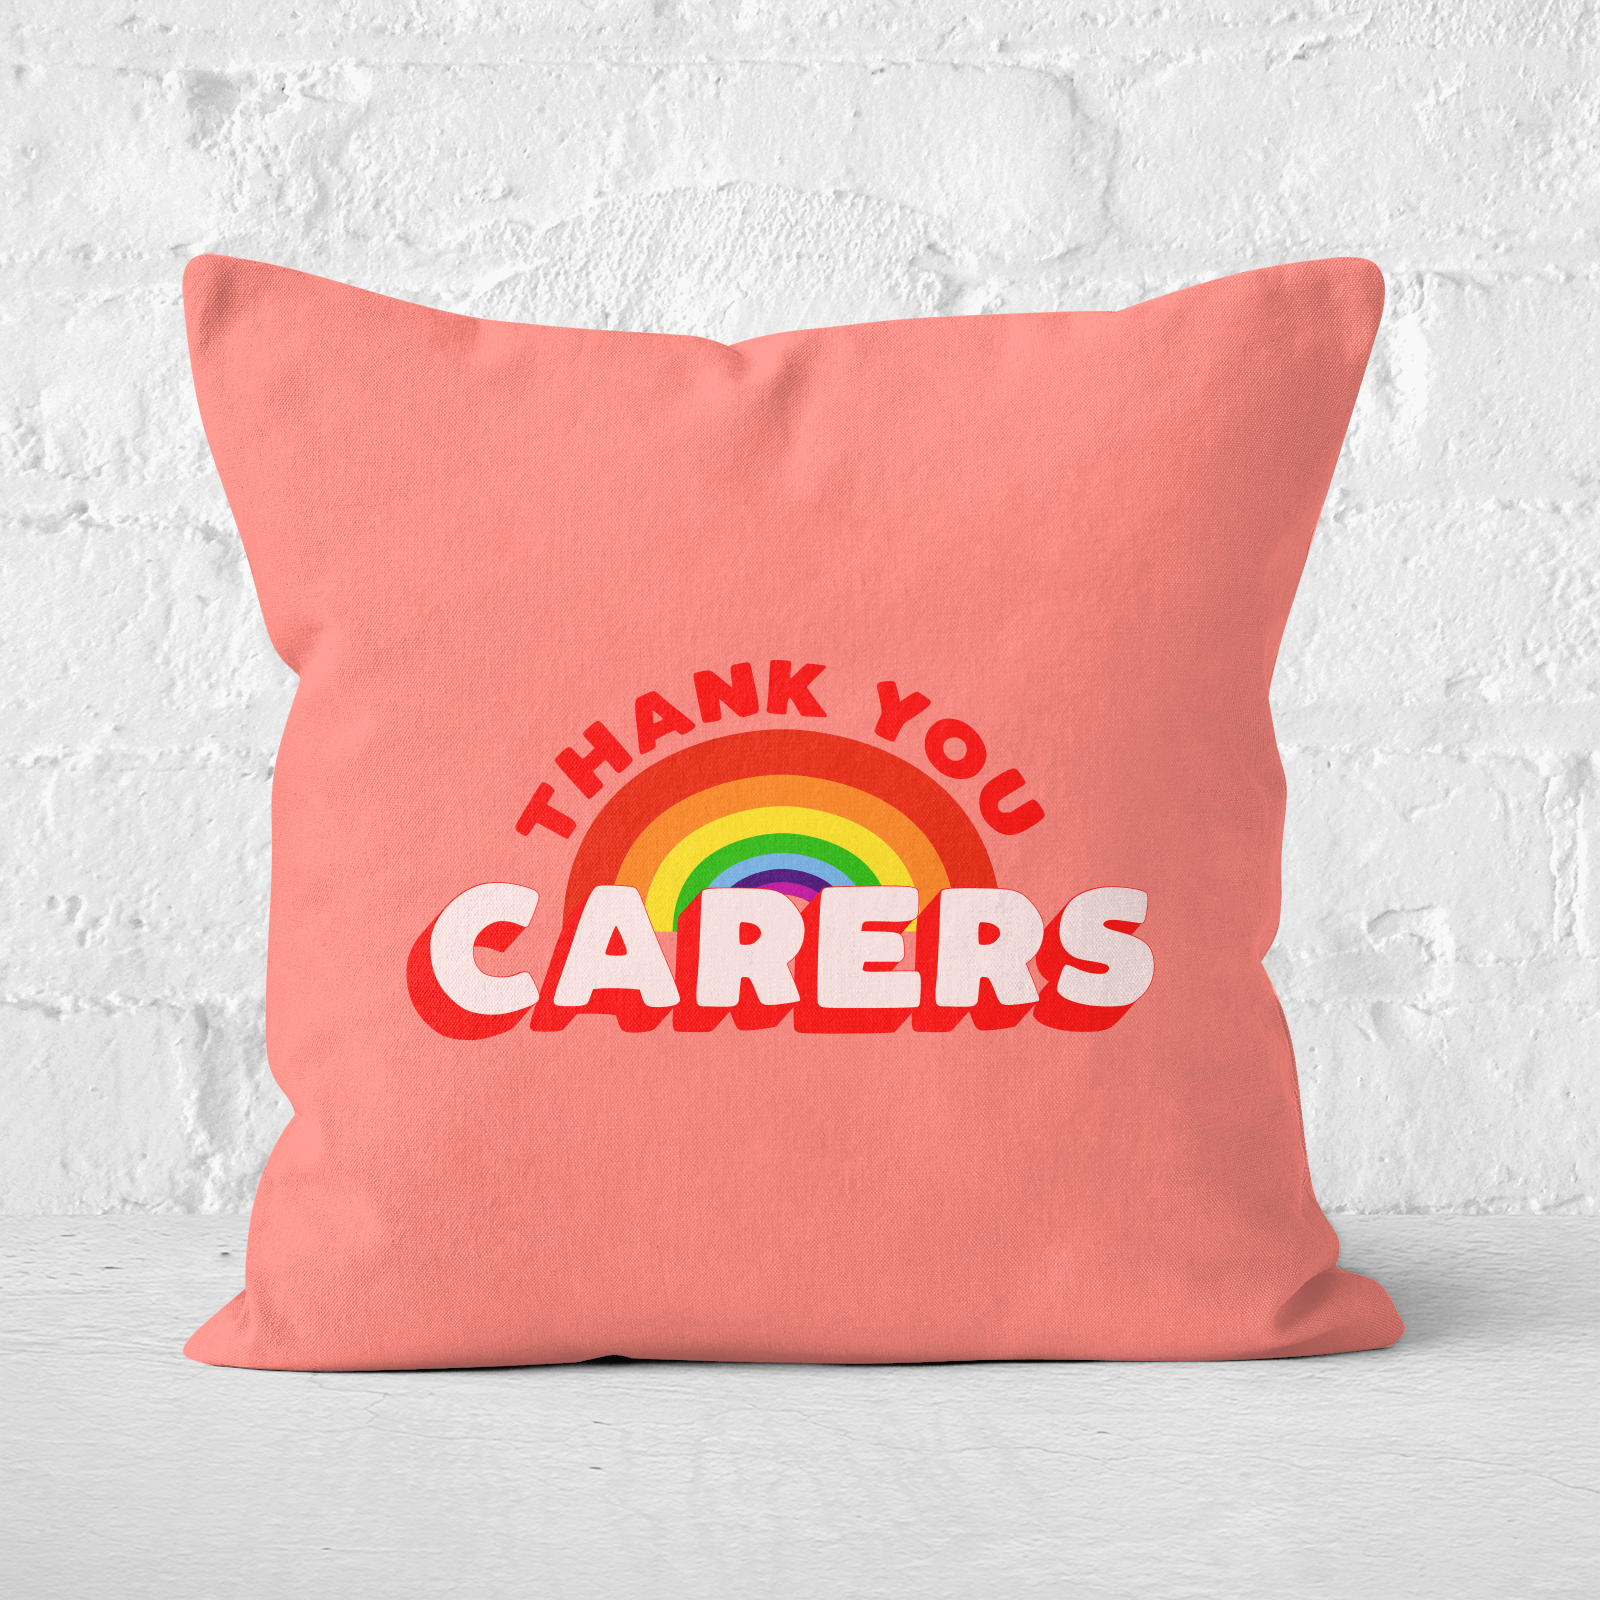 Thank You Carers Square Cushion - 60x60cm - Soft Touch